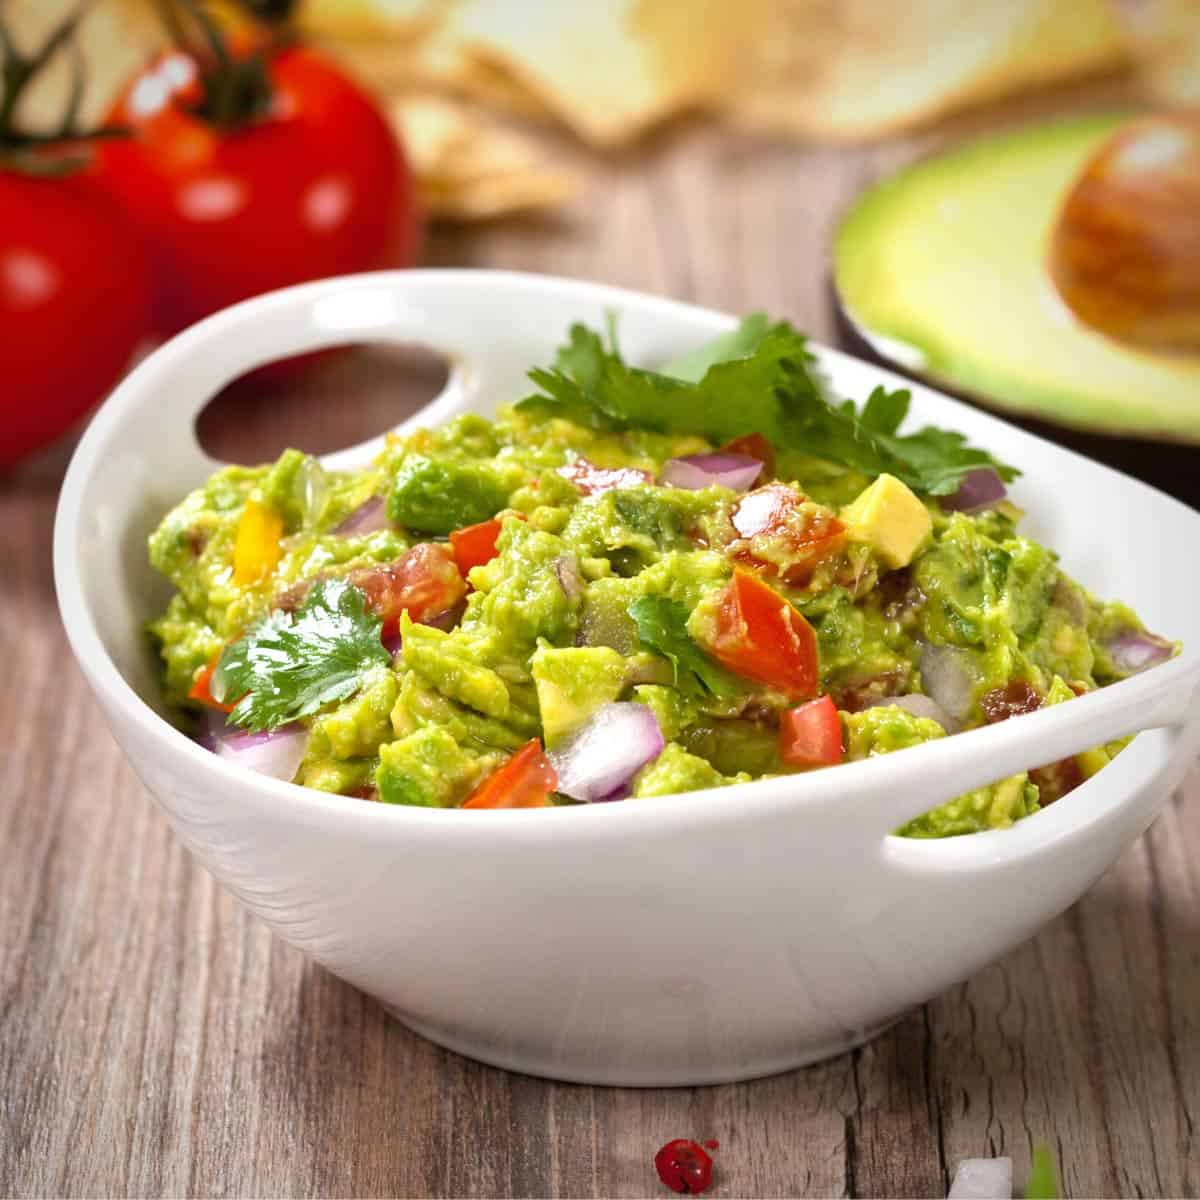 Guacamole in a white bowl on a wooden surface with red tomatoes and an avocado half visible in the background.